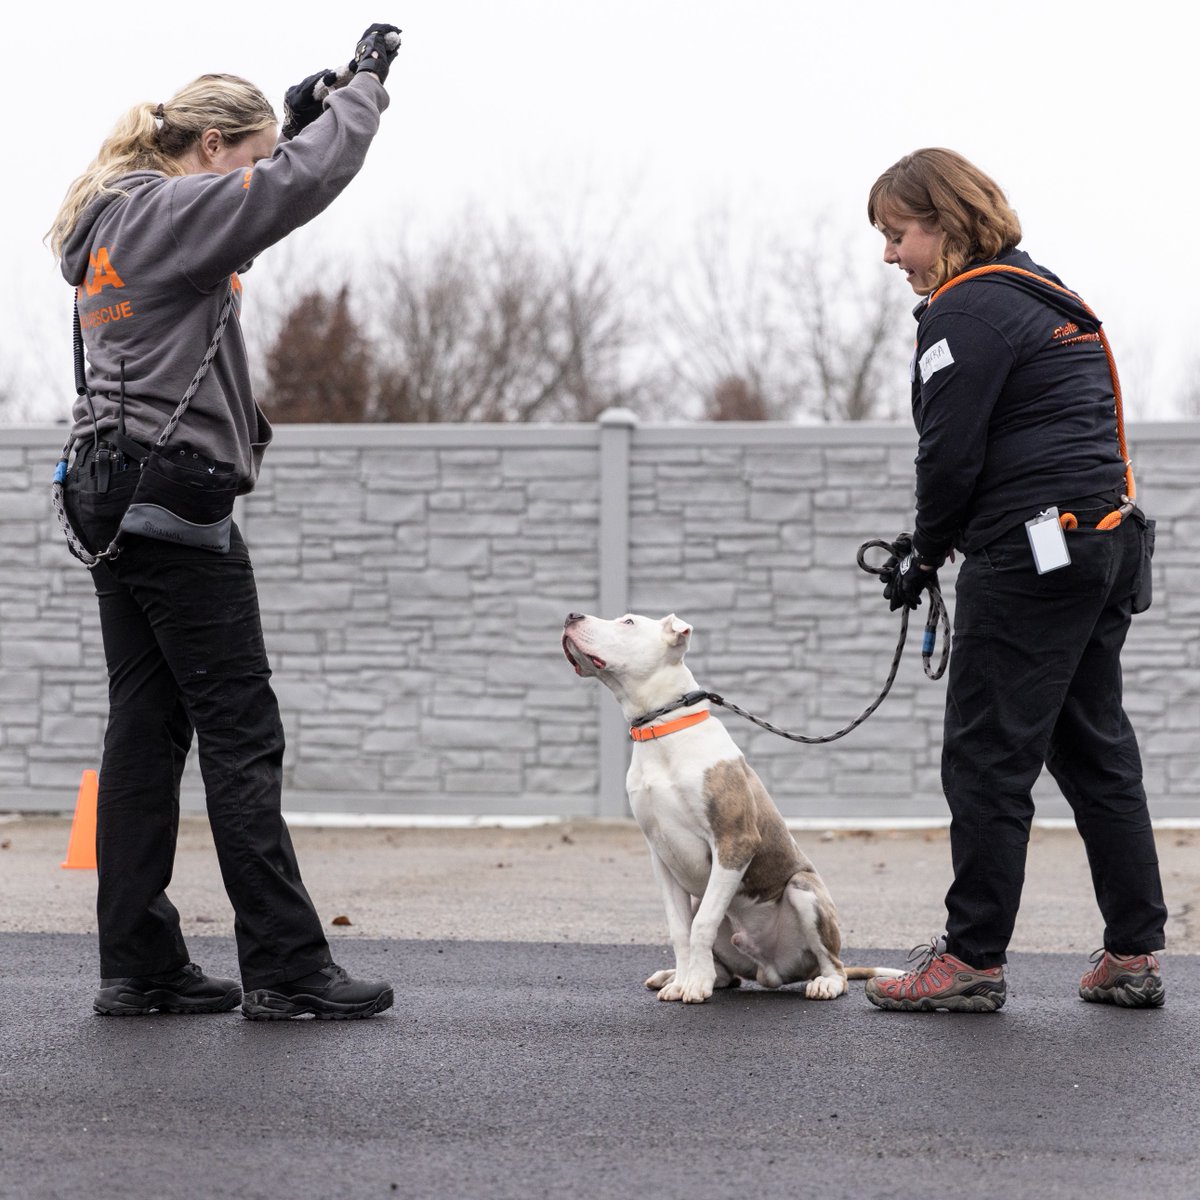 We're #hiring a Vice President to join our team at the Cruelty Recovery Center in #Columbus Ohio. Are you a strong team leader who's passionate about cultivating a healthy team culture and helping at-risk animals? Apply today! 👇🐶 #JobOpening careers.aspca.org/search/jobdeta…